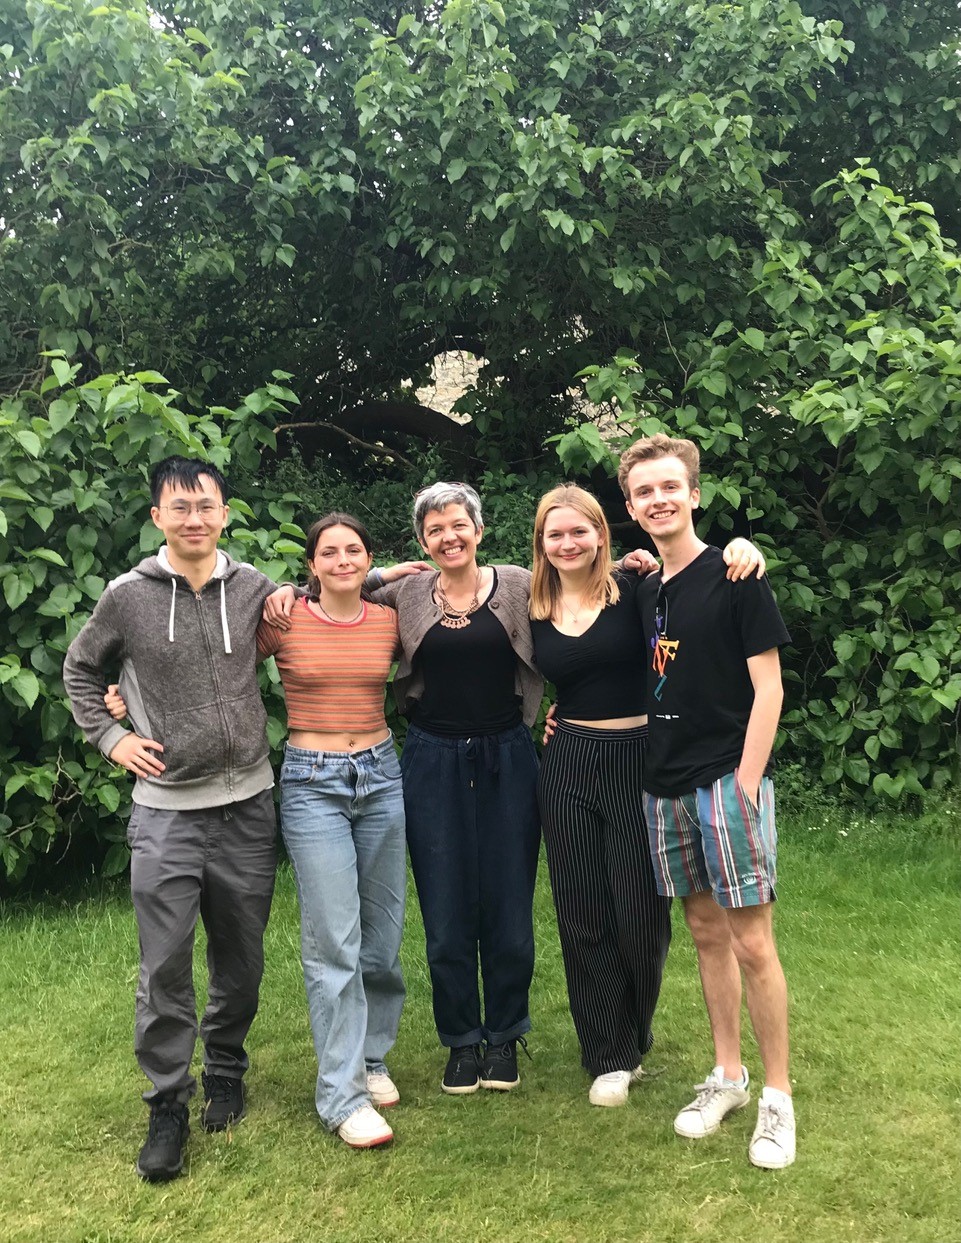 Yuyang Chen, Megan Macgillivray, a very proud Prof Ashleigh Griffin, Geena Goodwin and William Lunt. Trees in the background. 